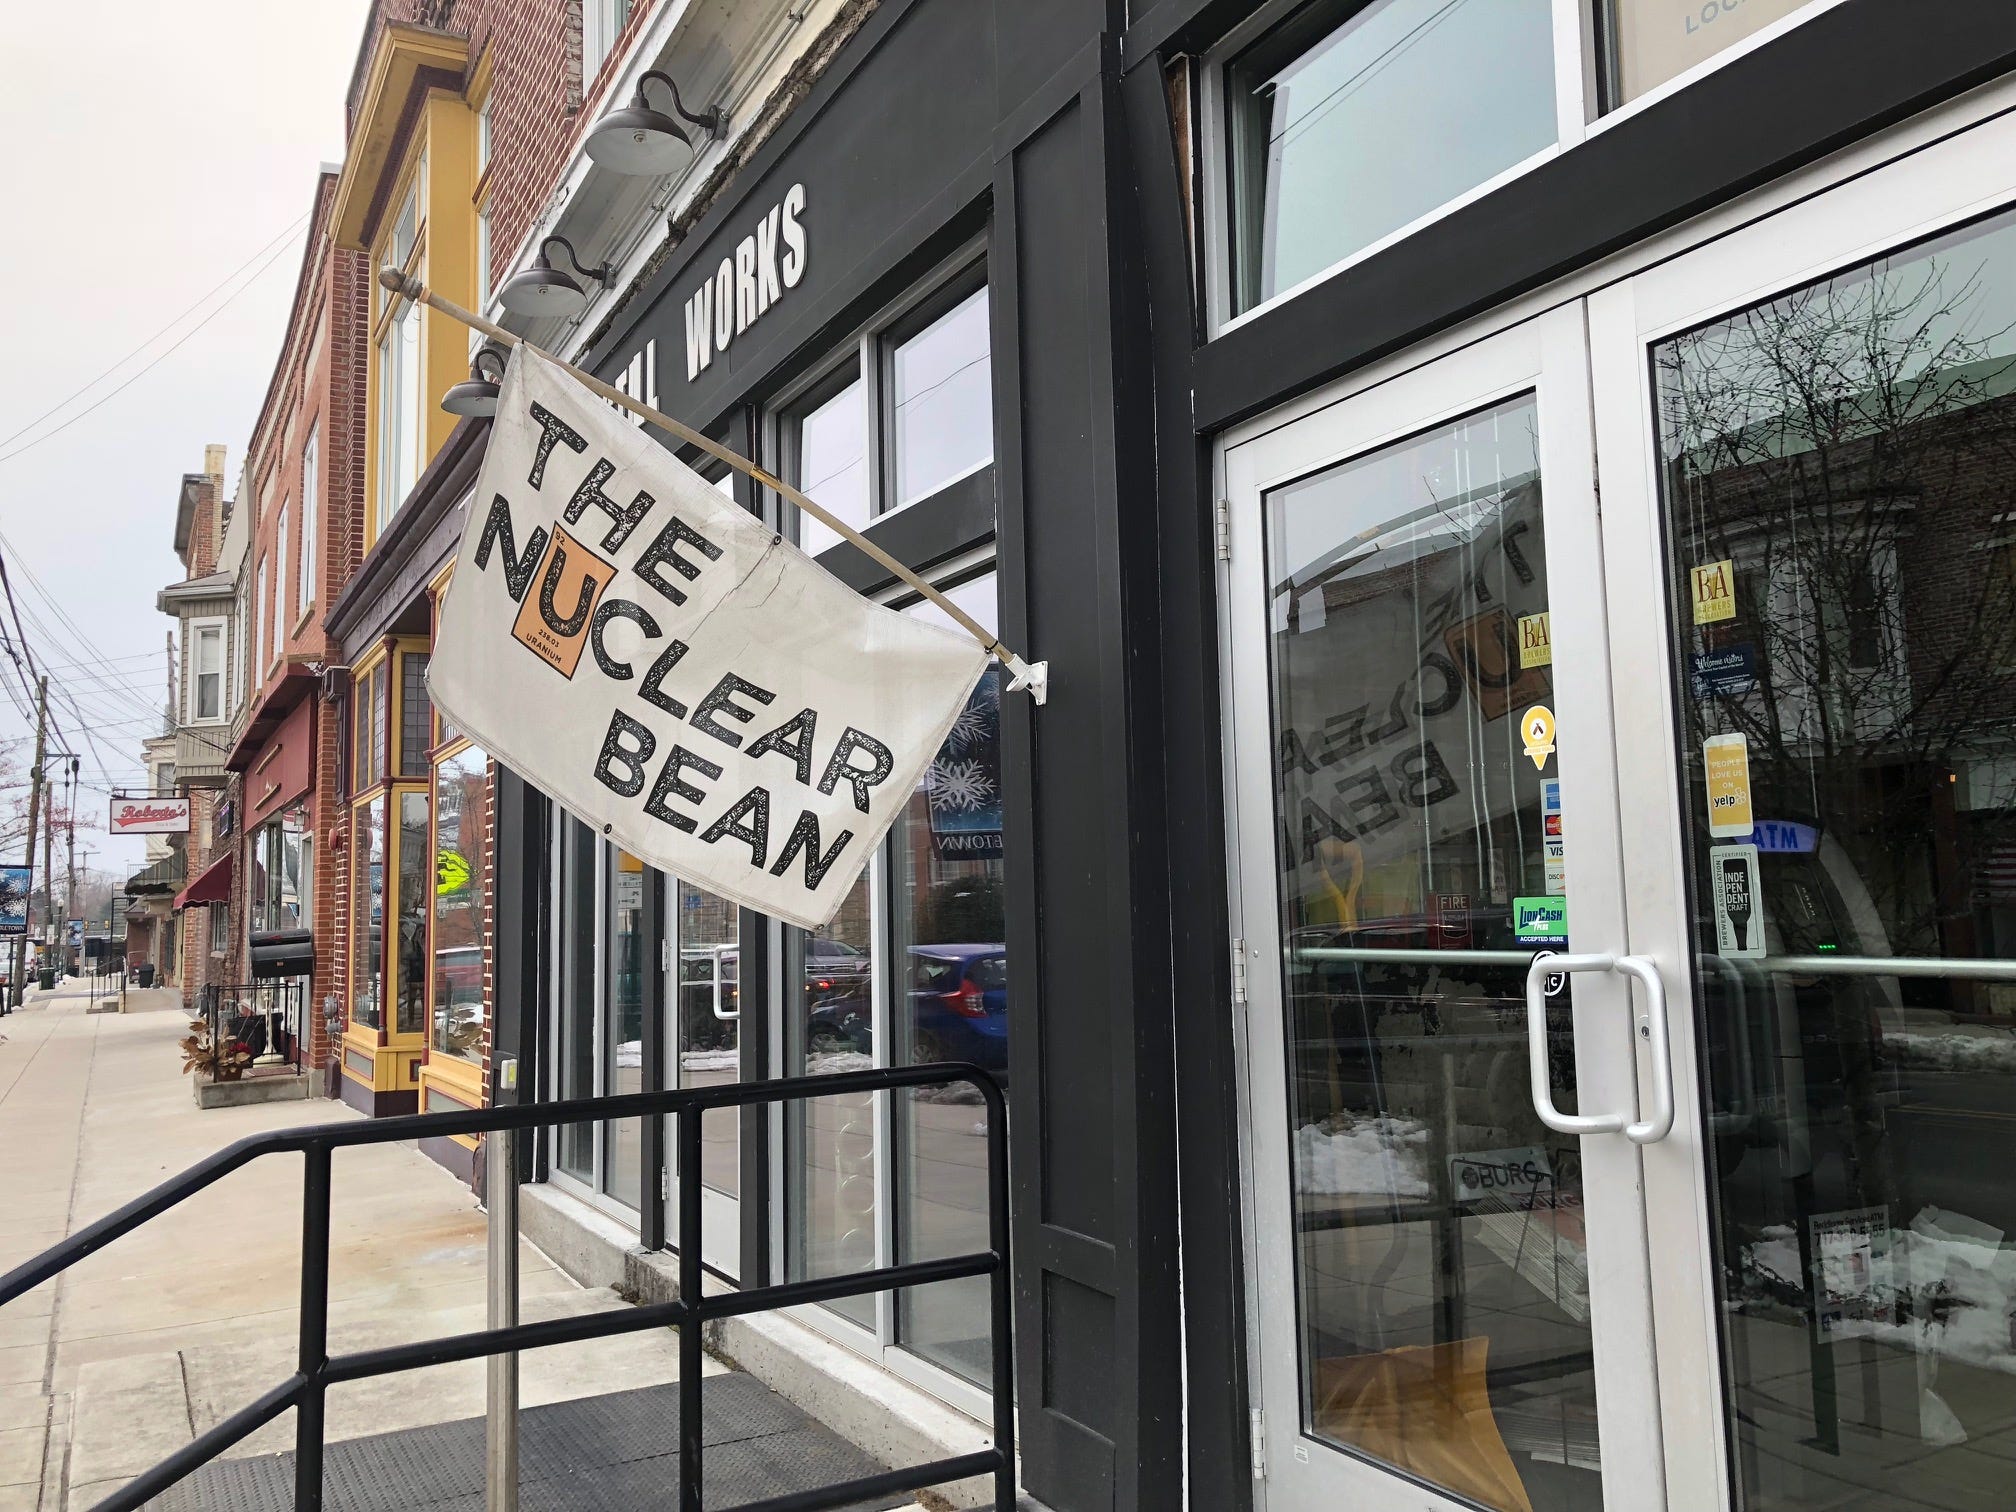 The Nuclear Bean, in Middletown, Dauphin County. The coffee shop based its name on its proximity to the Three Mile Island nuclear plant, about 3 miles away — Middletown, Friday, March 8, 2019. (Photo by: Lindsay C. VanAsdalan)